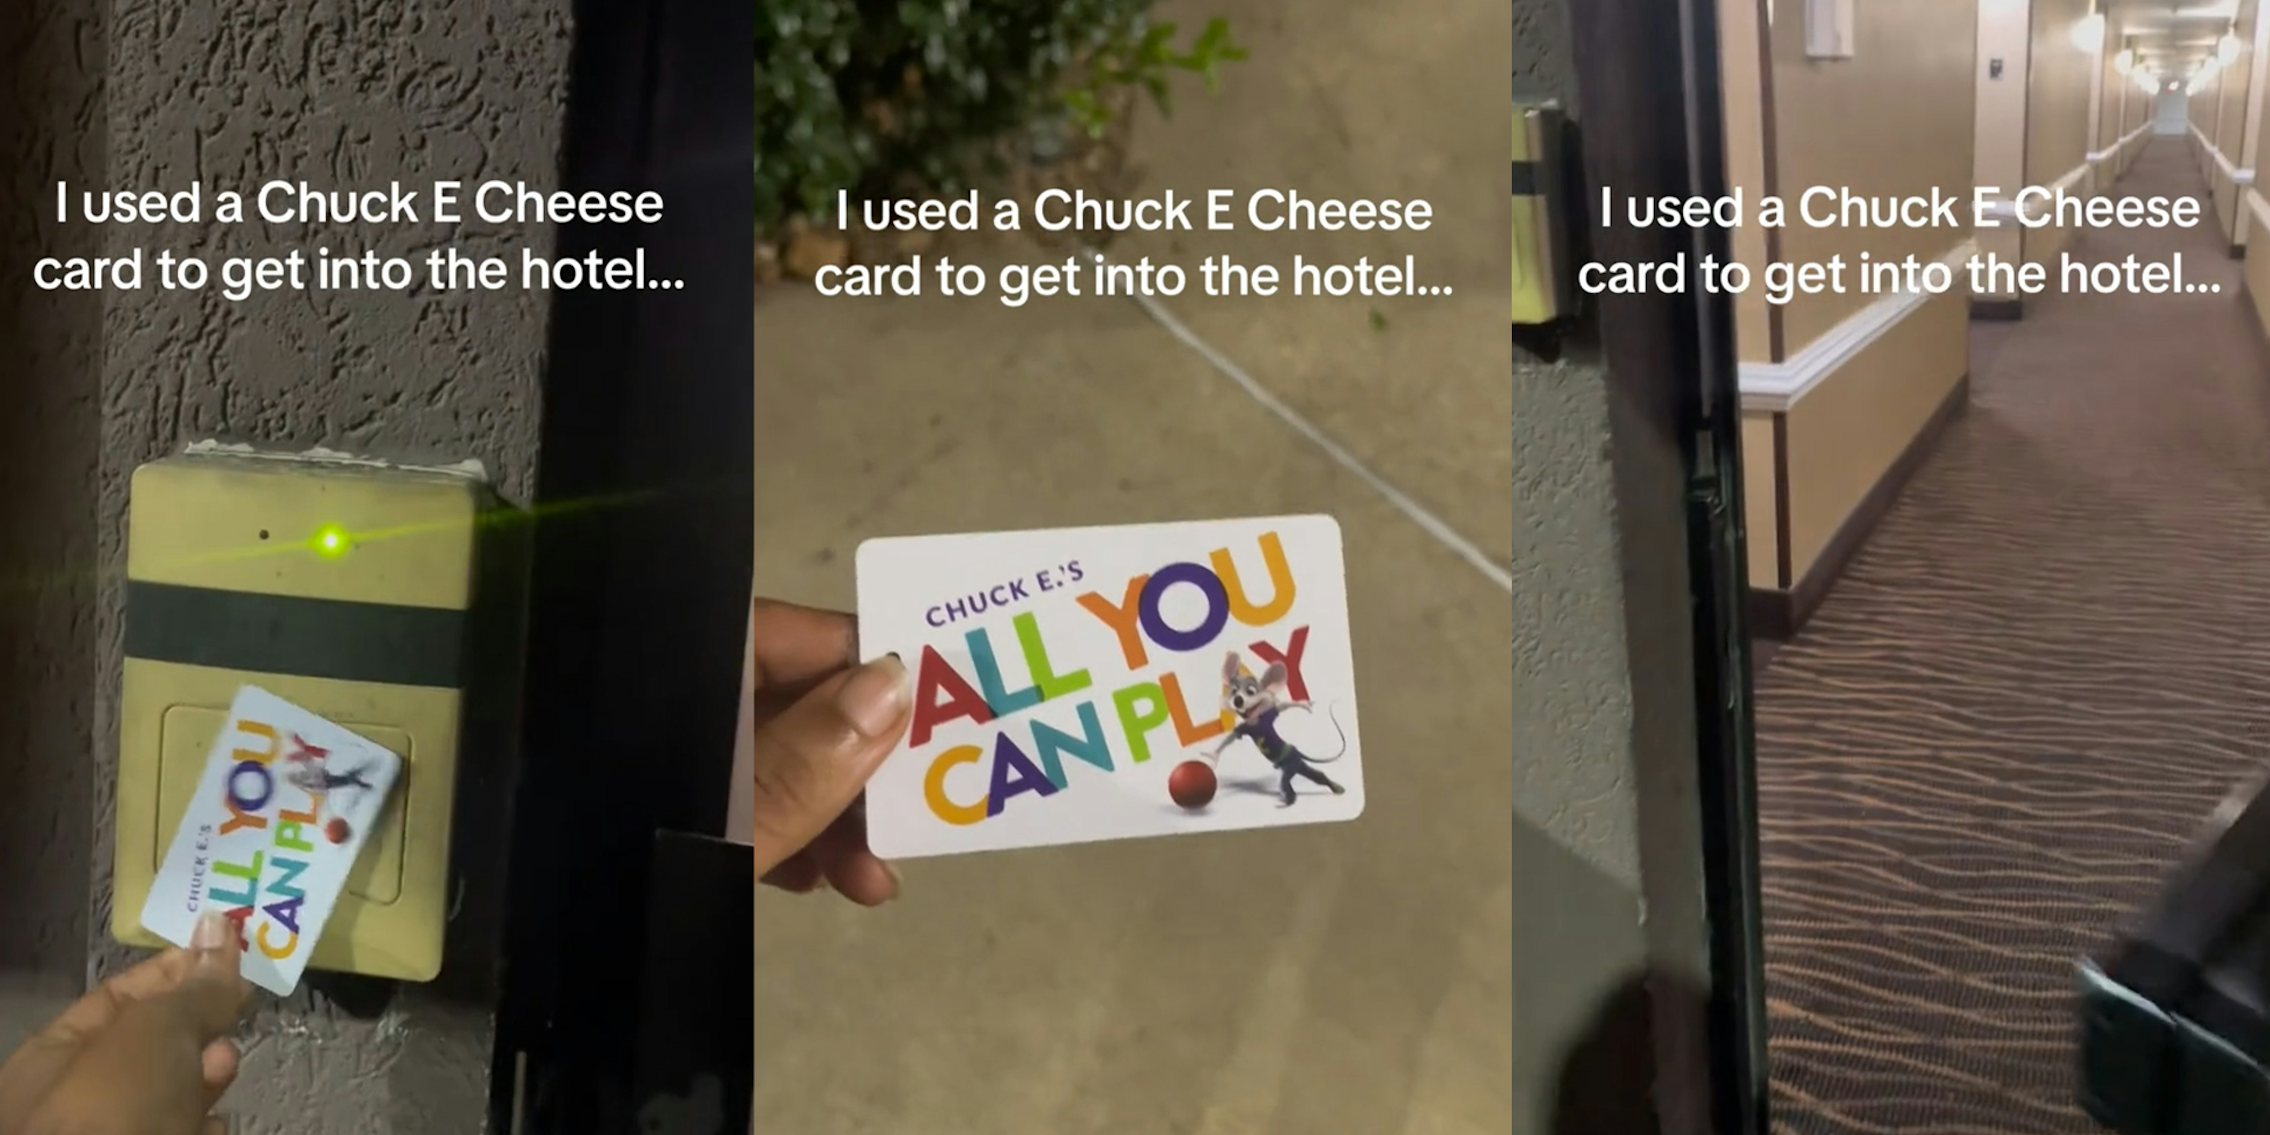 Guest uses Chuck E. Cheese card to get into hotel